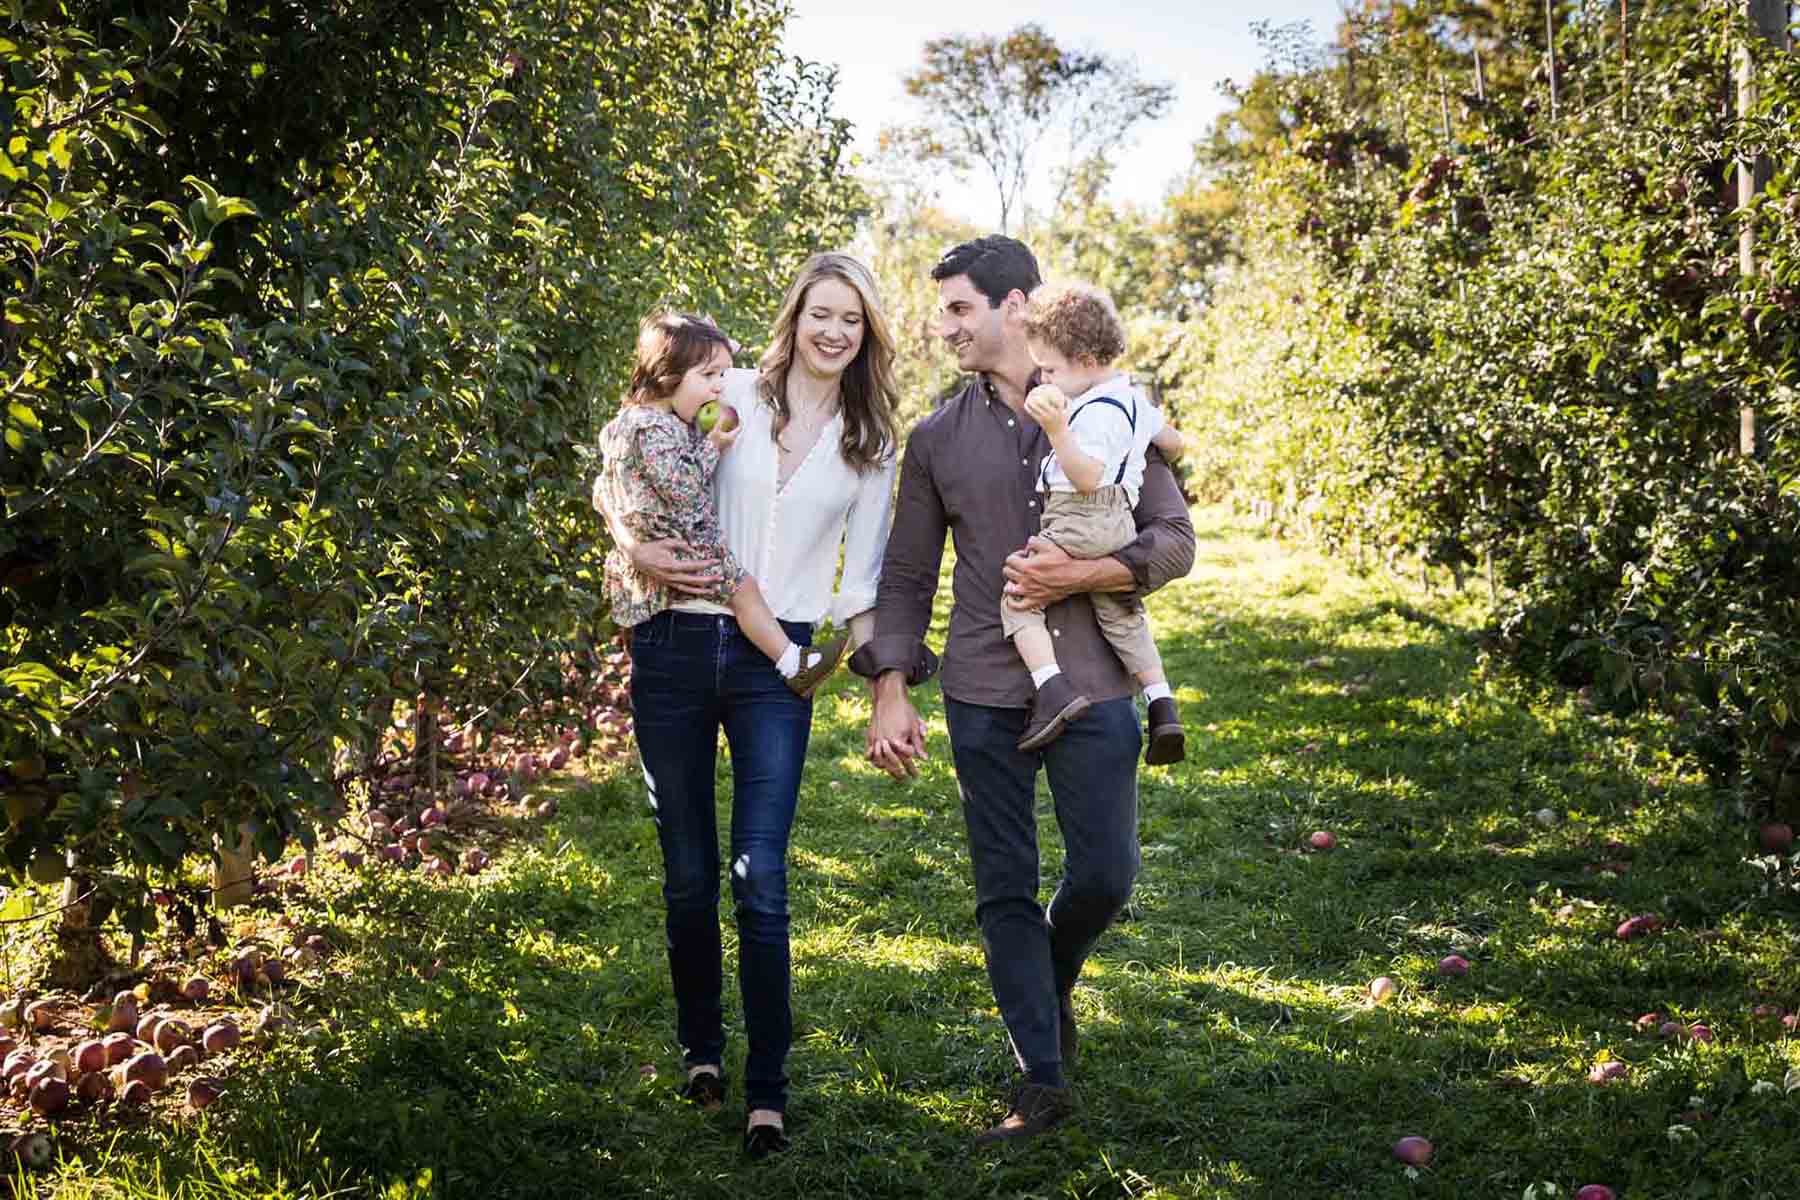 Parents holding little children and walking through an orchard for an article on tips for apple picking family photos